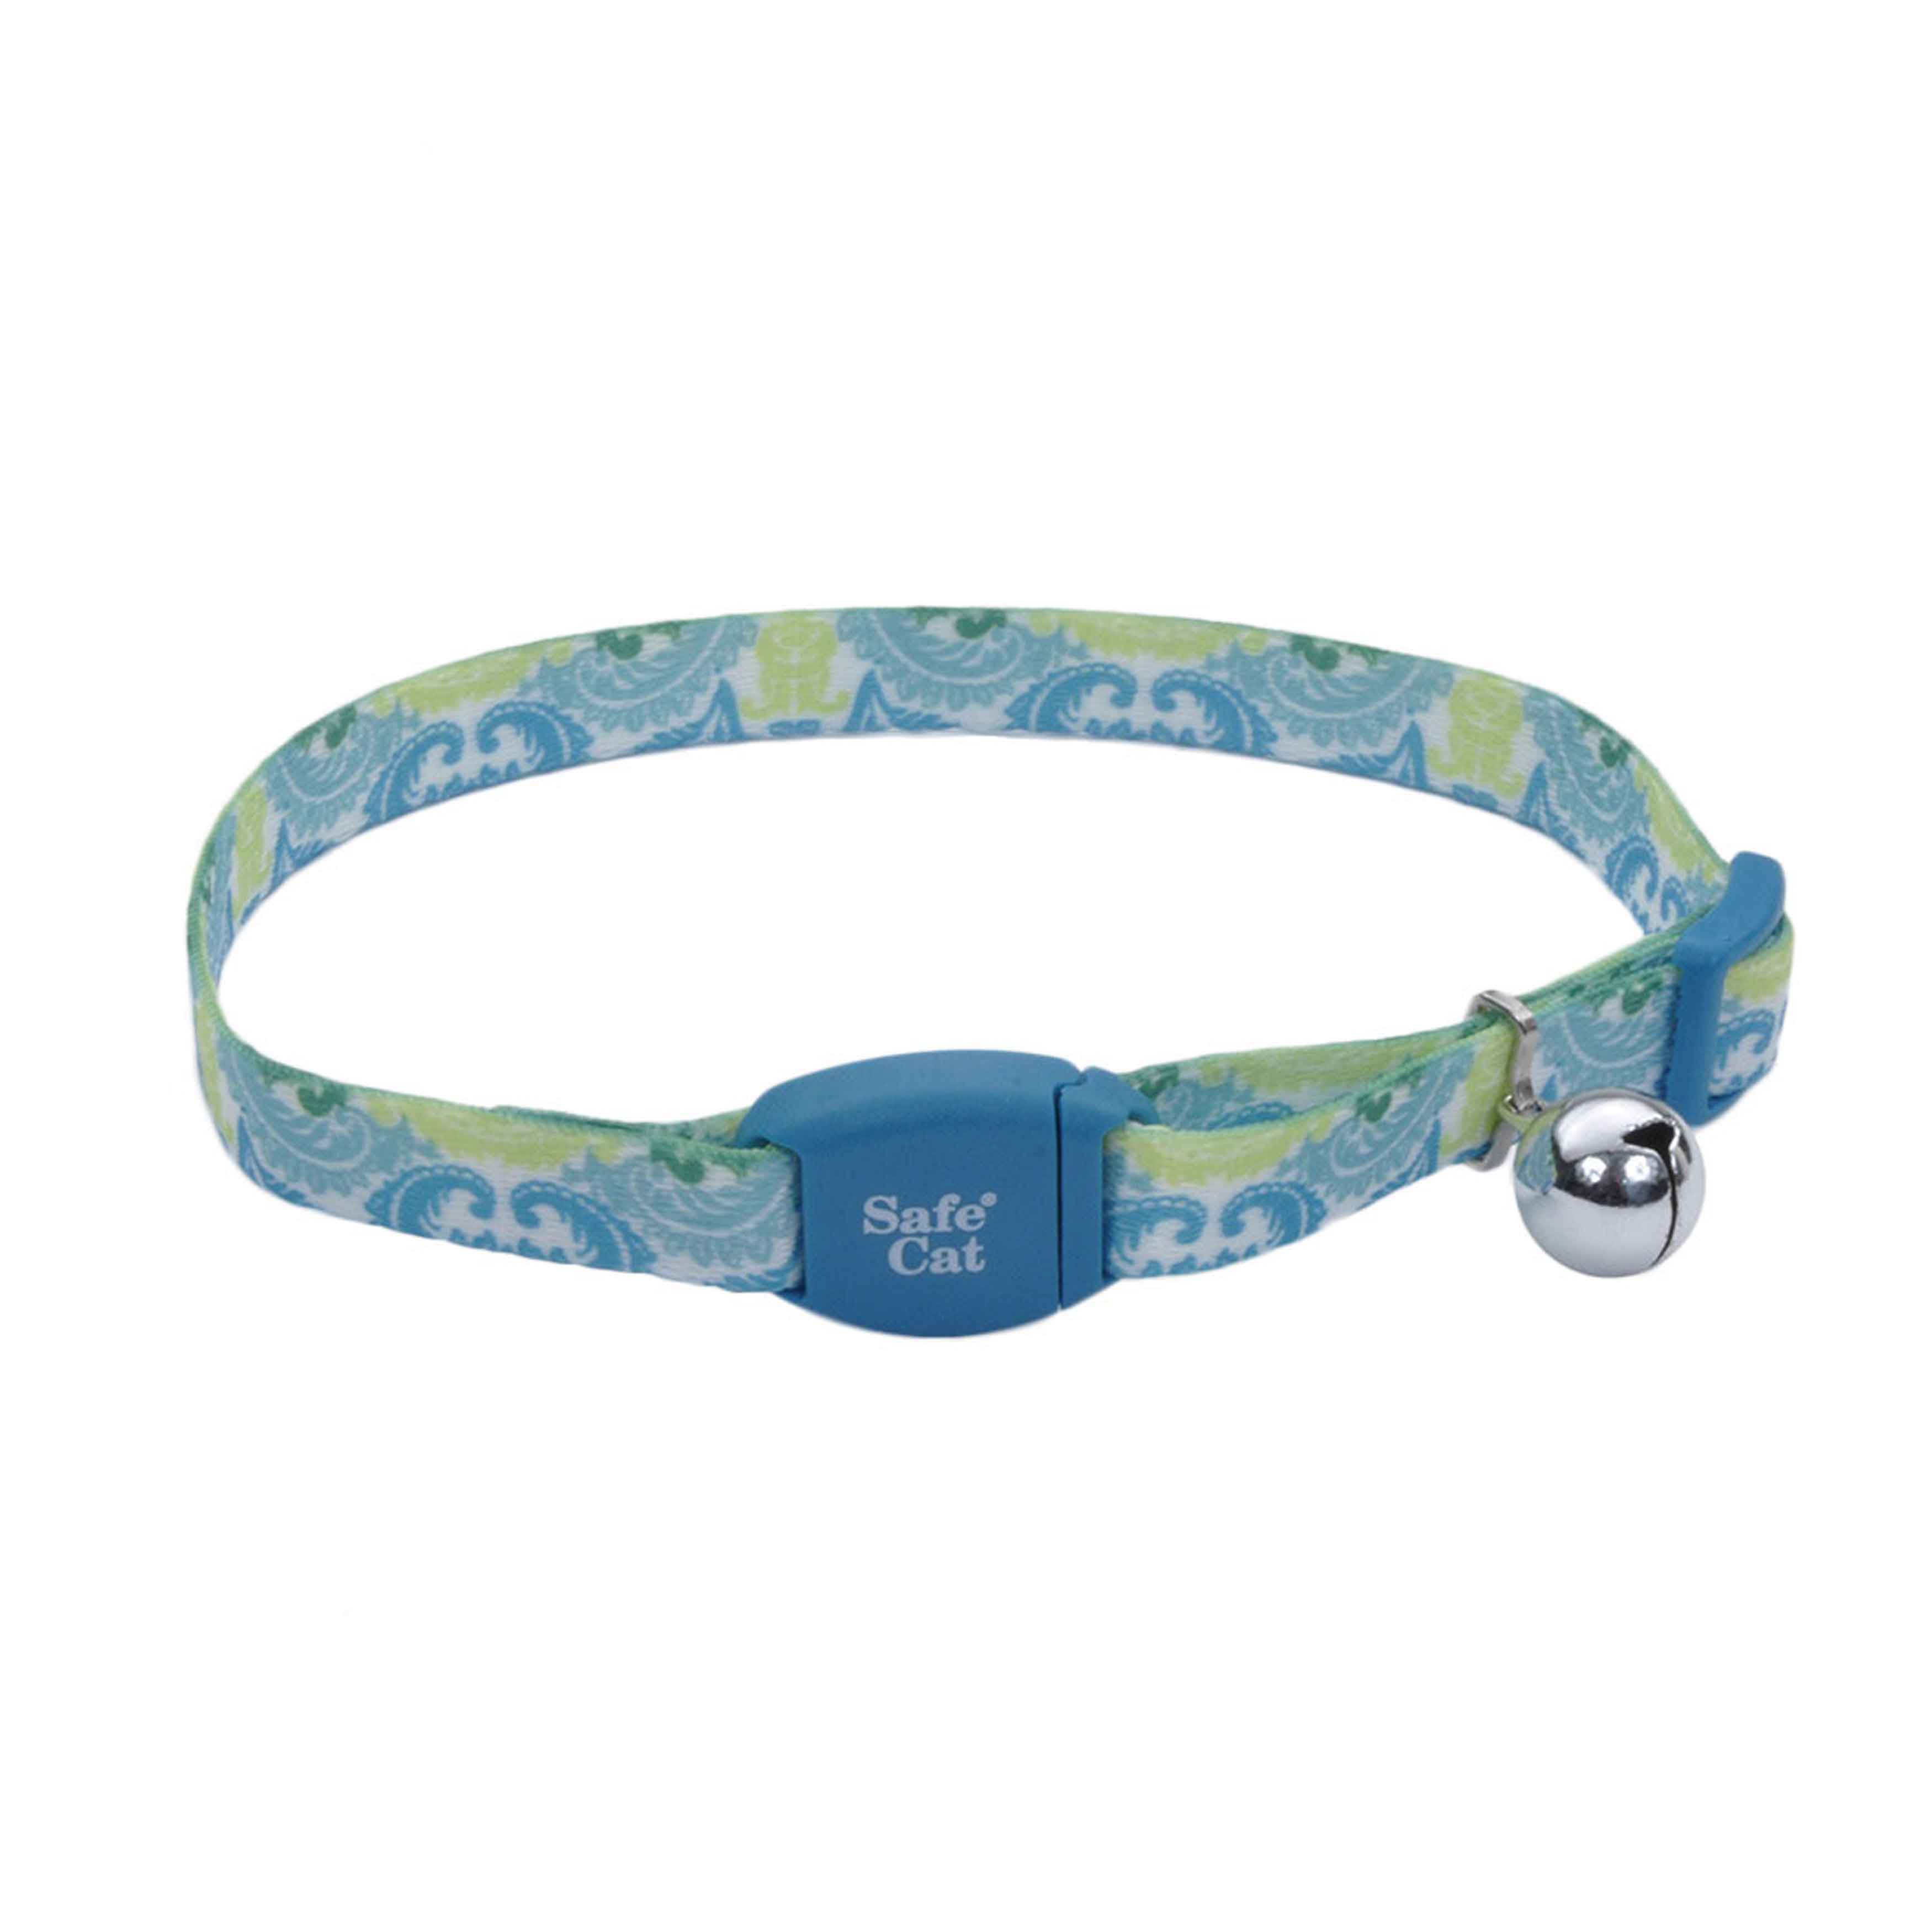 Safe CatÂ® Adjustable Breakaway Cat Collar with Magnetic Buckle, Teal Peacock, 3/8